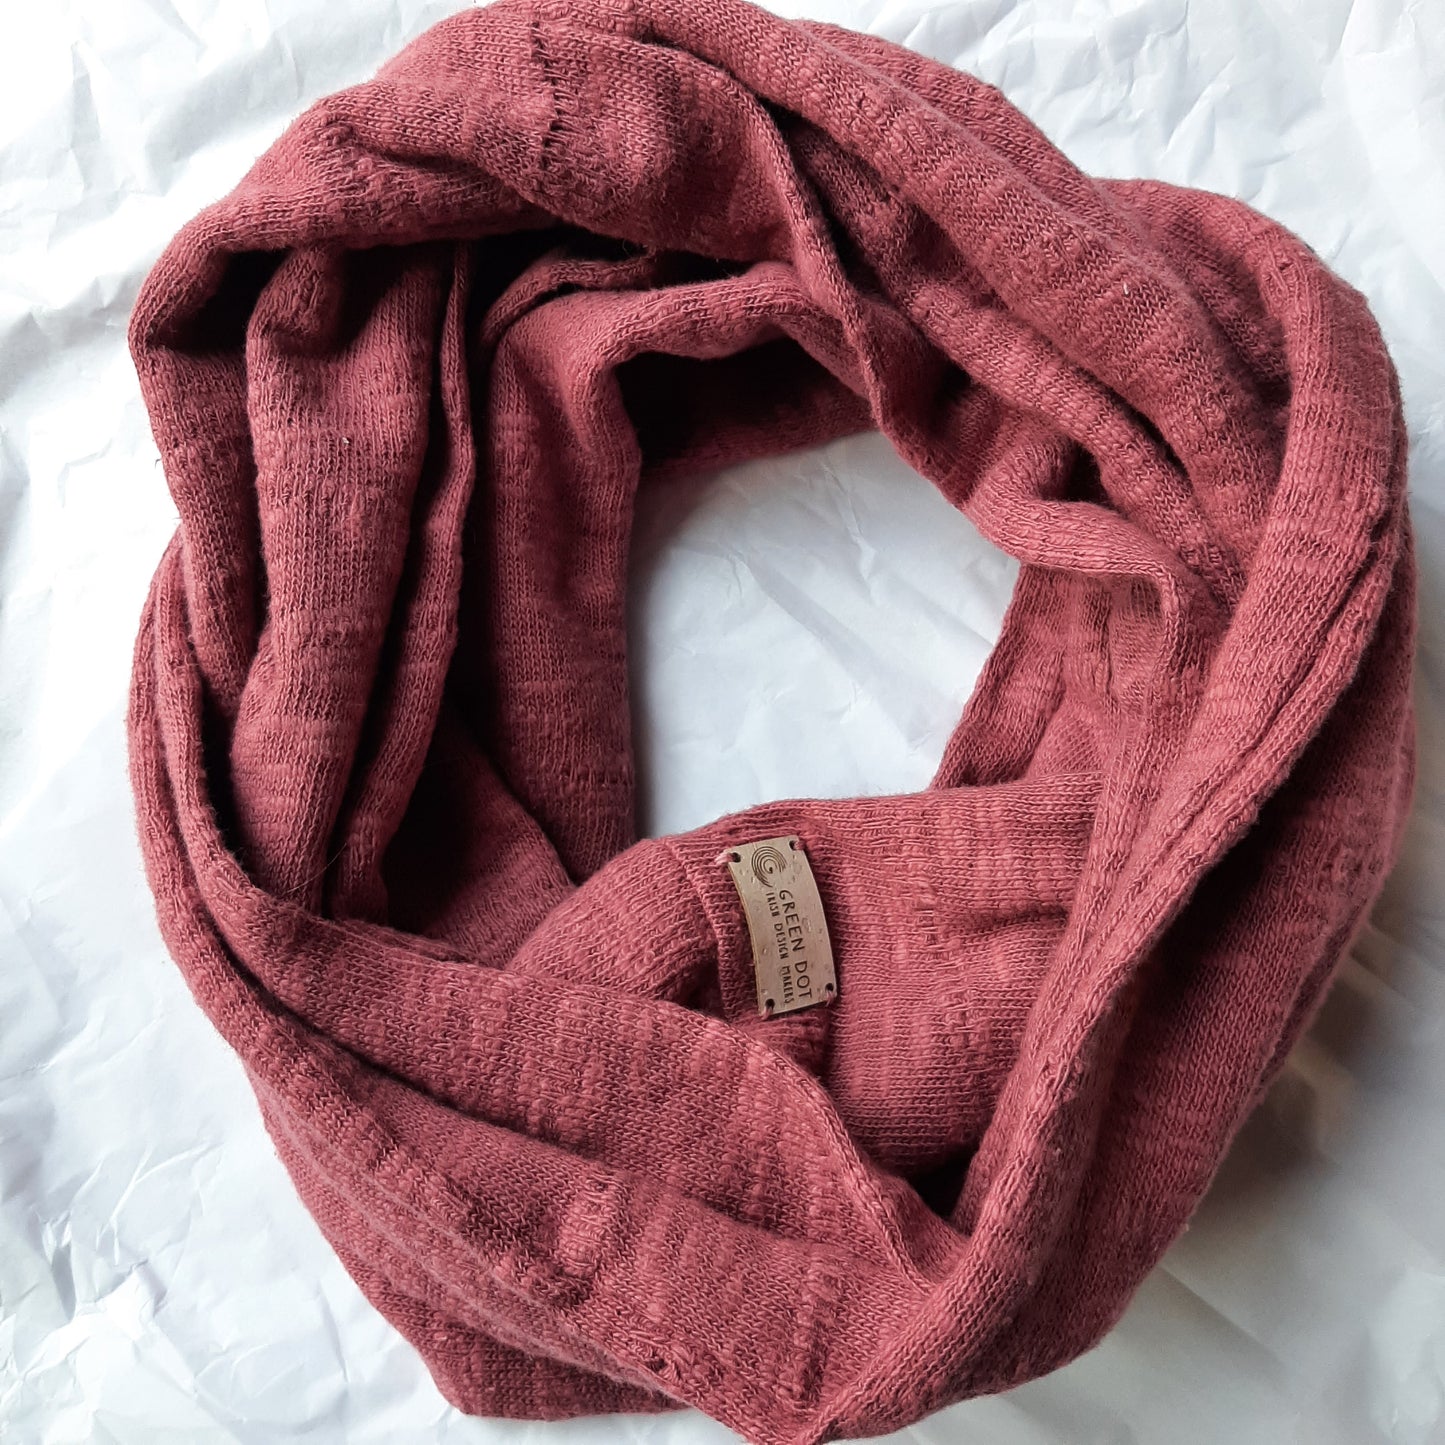 The Good Scarf - Dusty rose